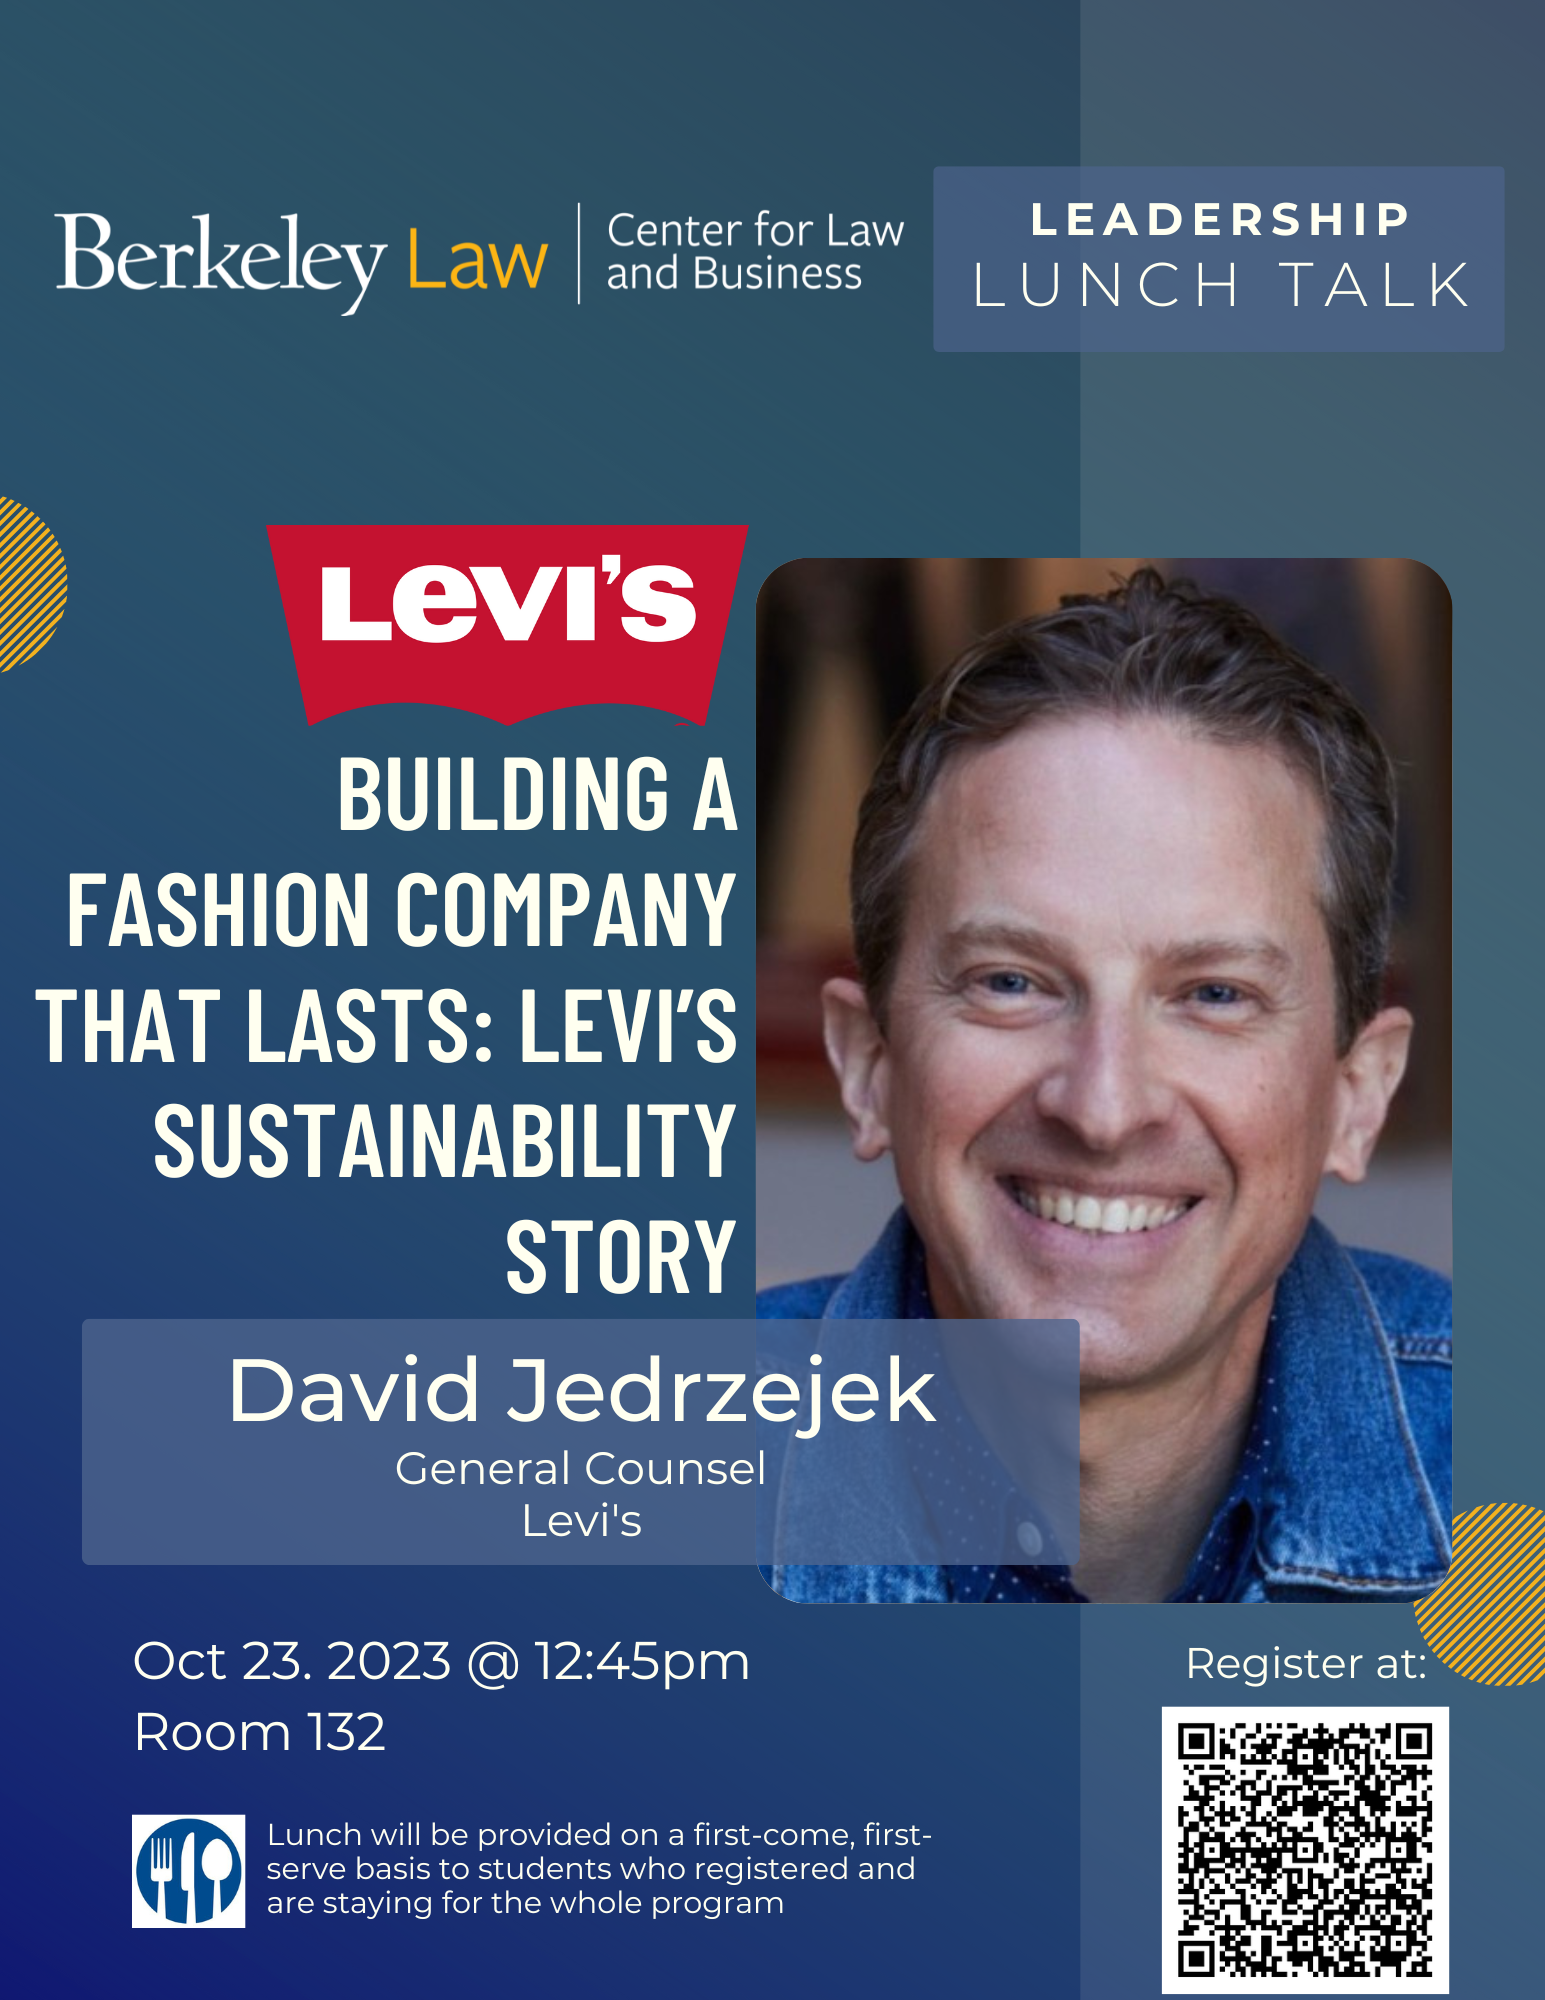 Lunch Talk Flyer- Levi's